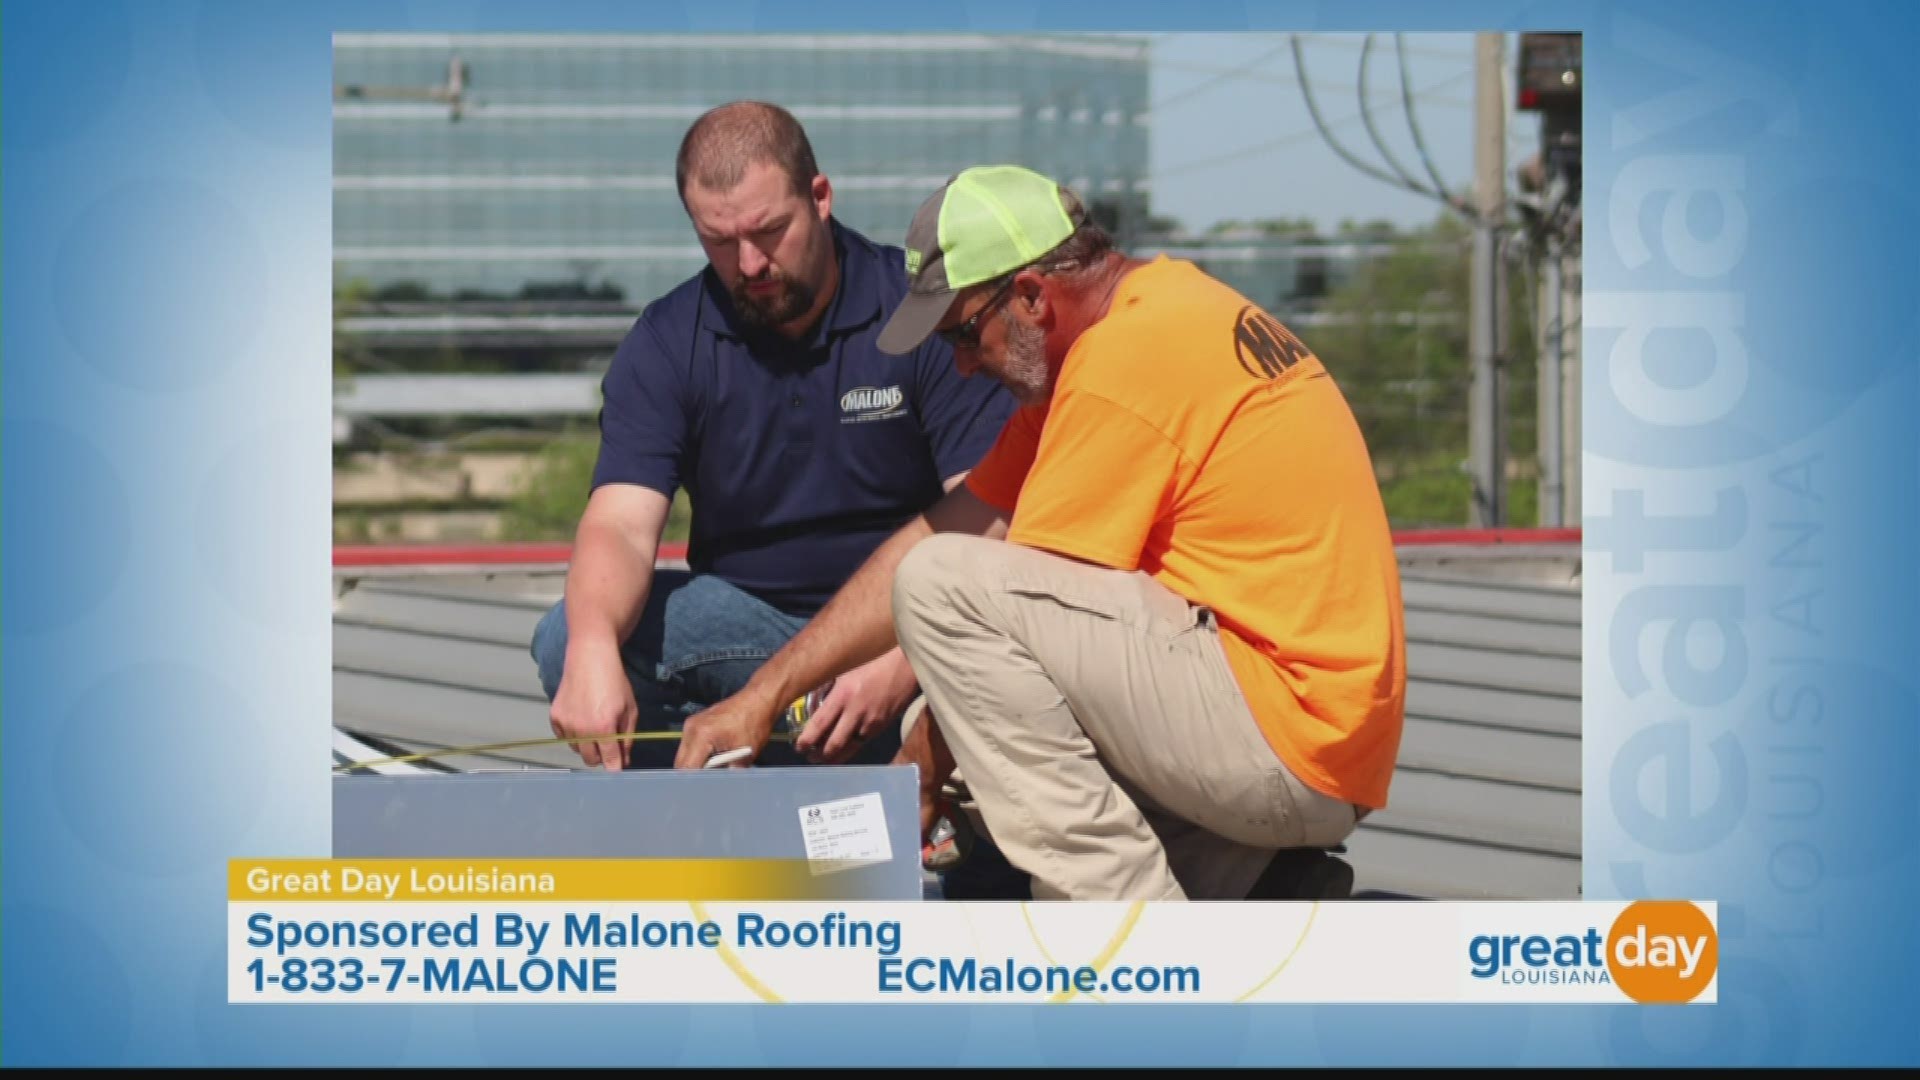 For more information, visit ecmalone.com or give them a call at 1-833-7-MALONE.